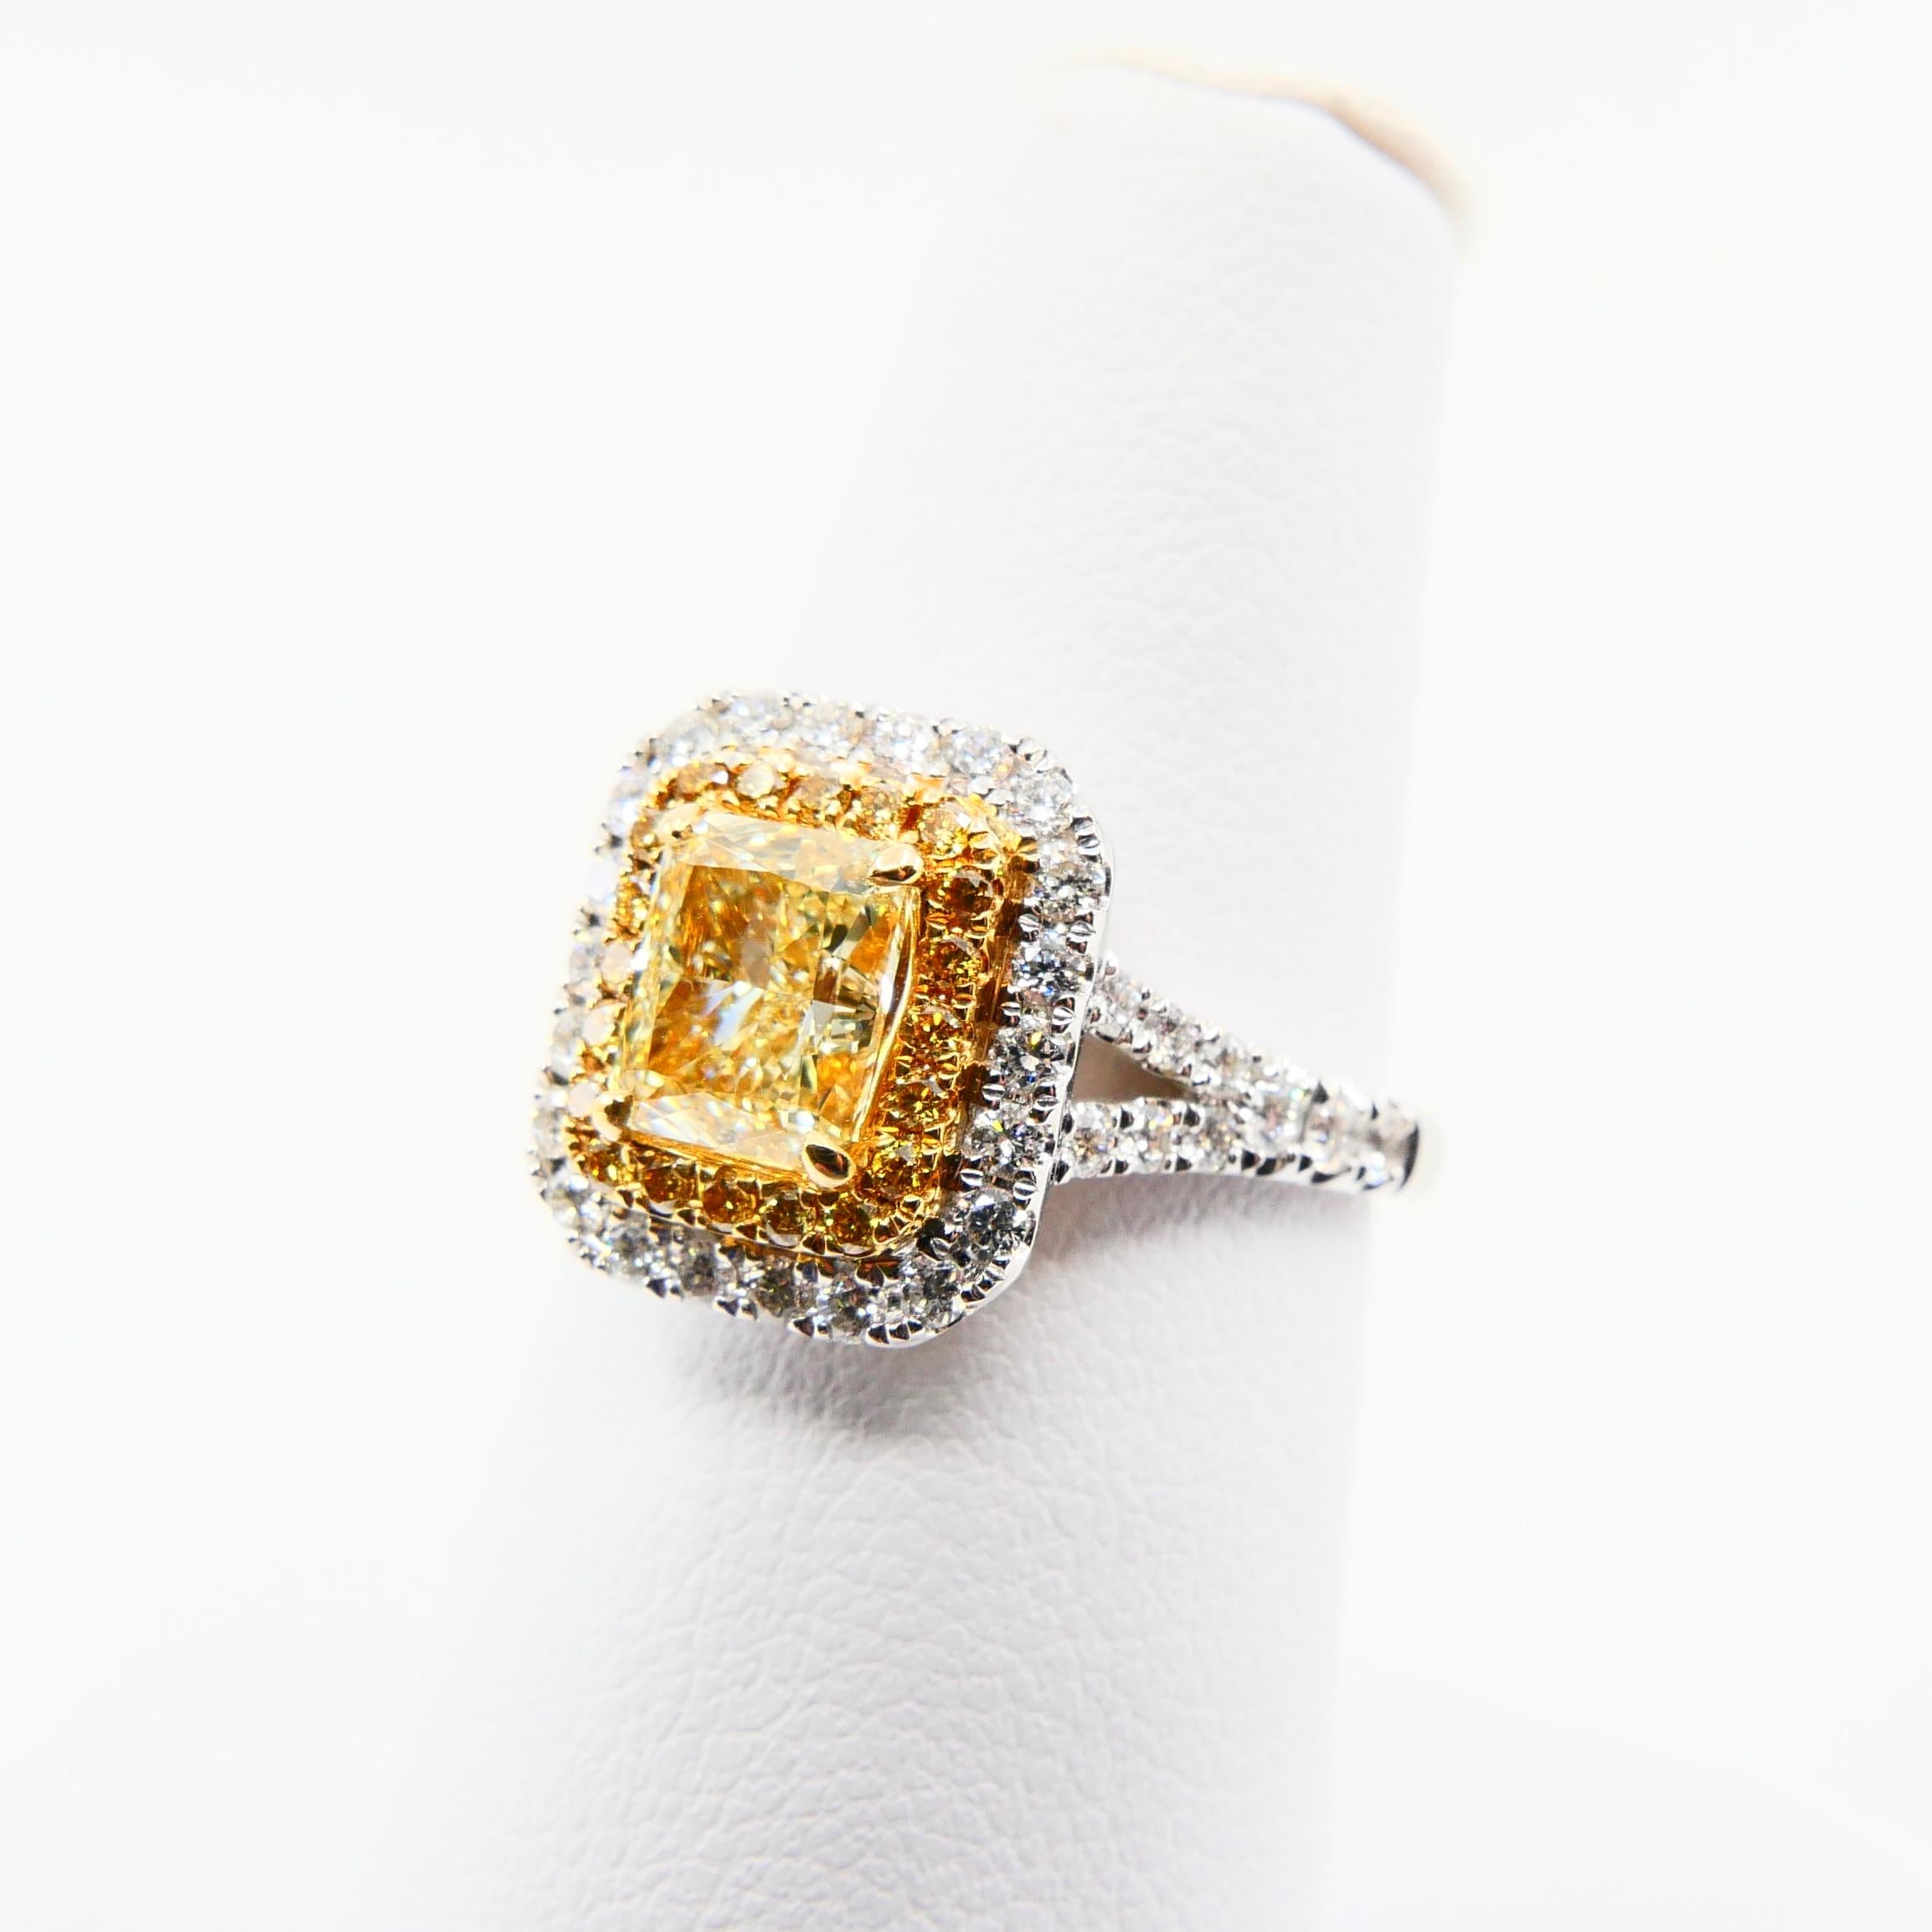 GIA Certified 1.06 Carat Cape Yellow Diamond Cocktail Ring, Double Halo Setting For Sale 3